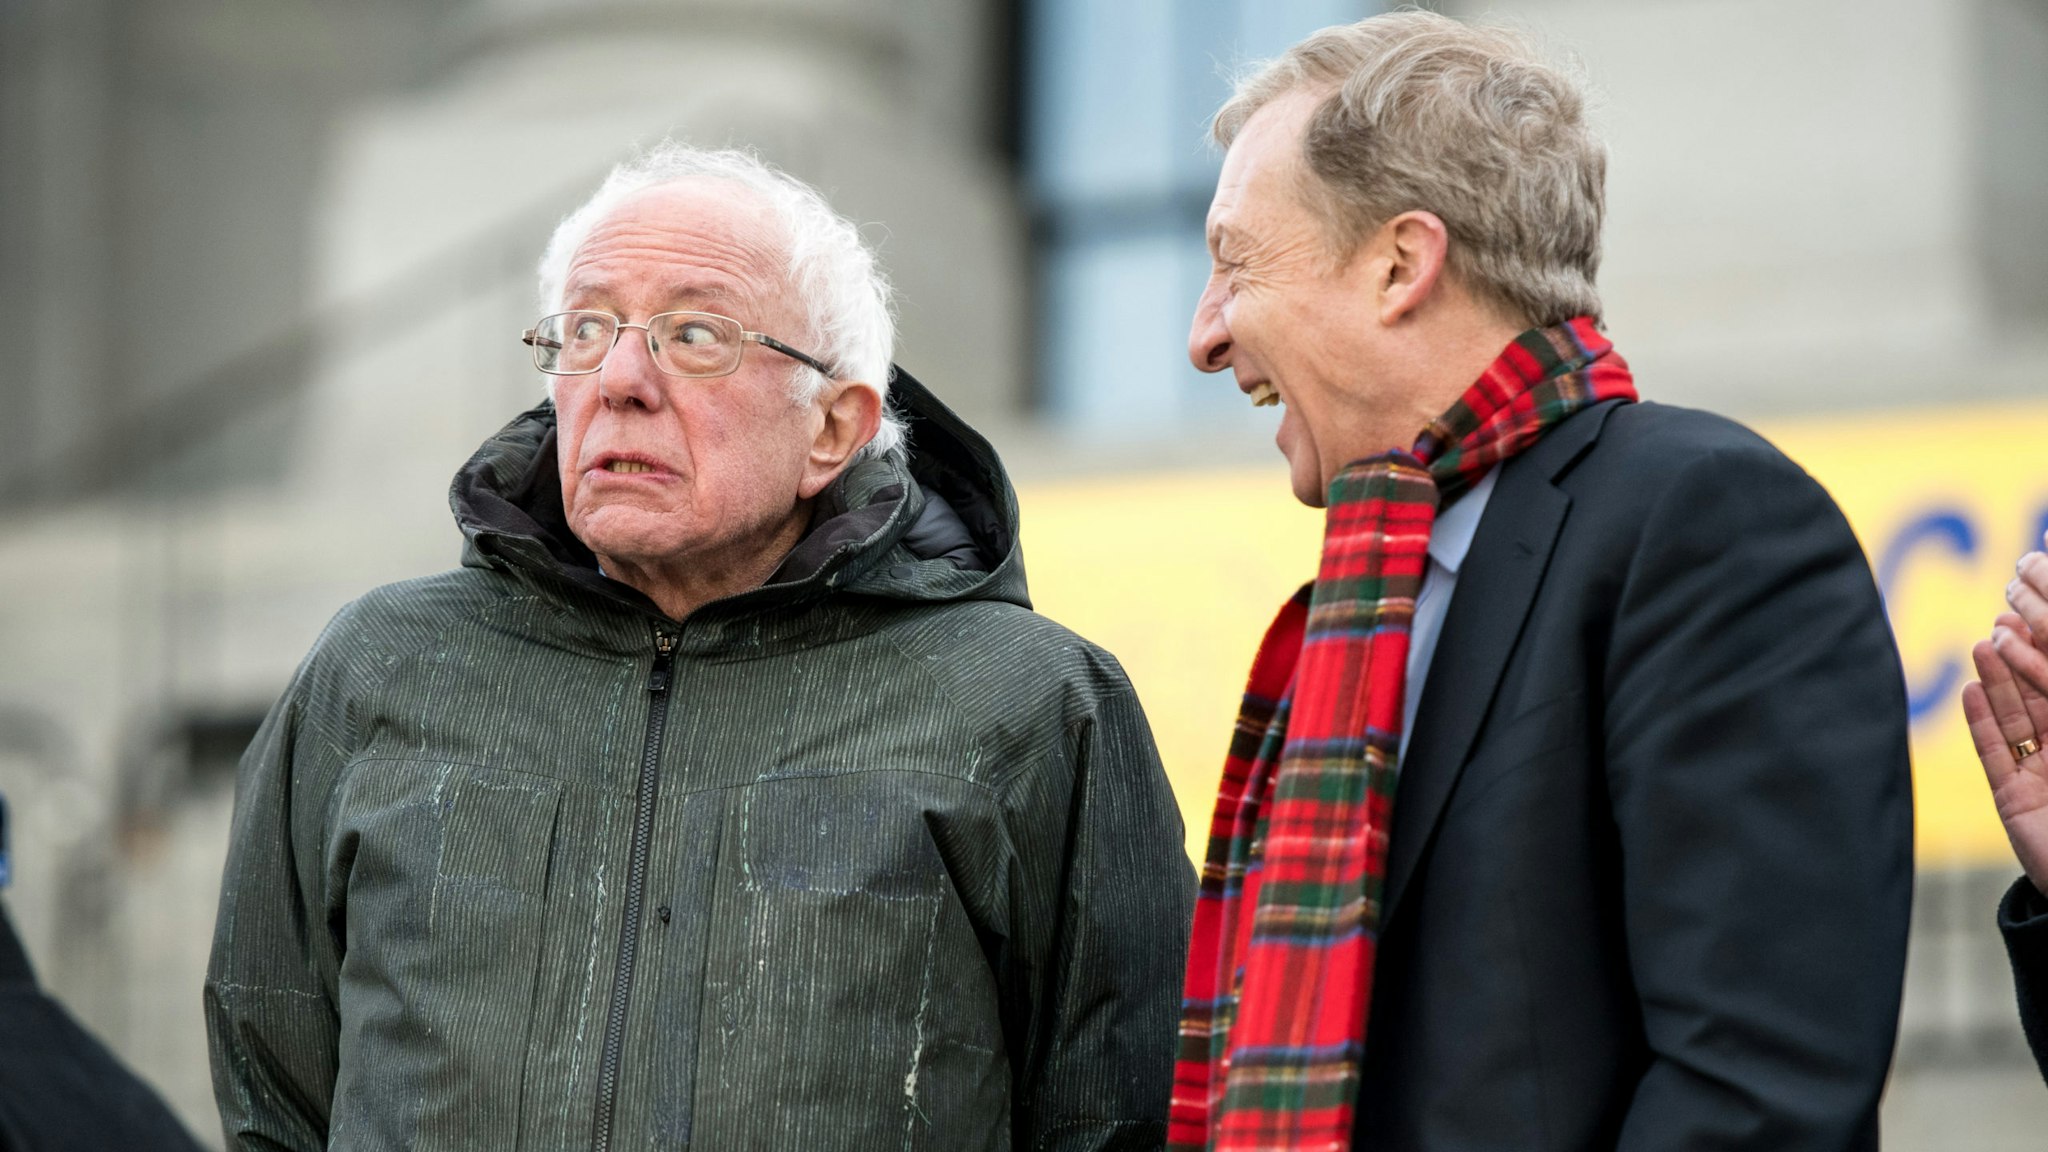 COLUMBIA, SC - JANUARY 20: Democratic presidential candidates, Sen. Bernie Sanders (I-VT), left, reacts to a conversation with Tom Steyer during the King Day at the Dome rally on January 20, 2020 in Columbia, South Carolina. The event, first held in 2000 in opposition to the display of the Confederate battle flag at the statehouse, attracted more than a handful Democratic presidential candidates looking for votes in the early primary state.